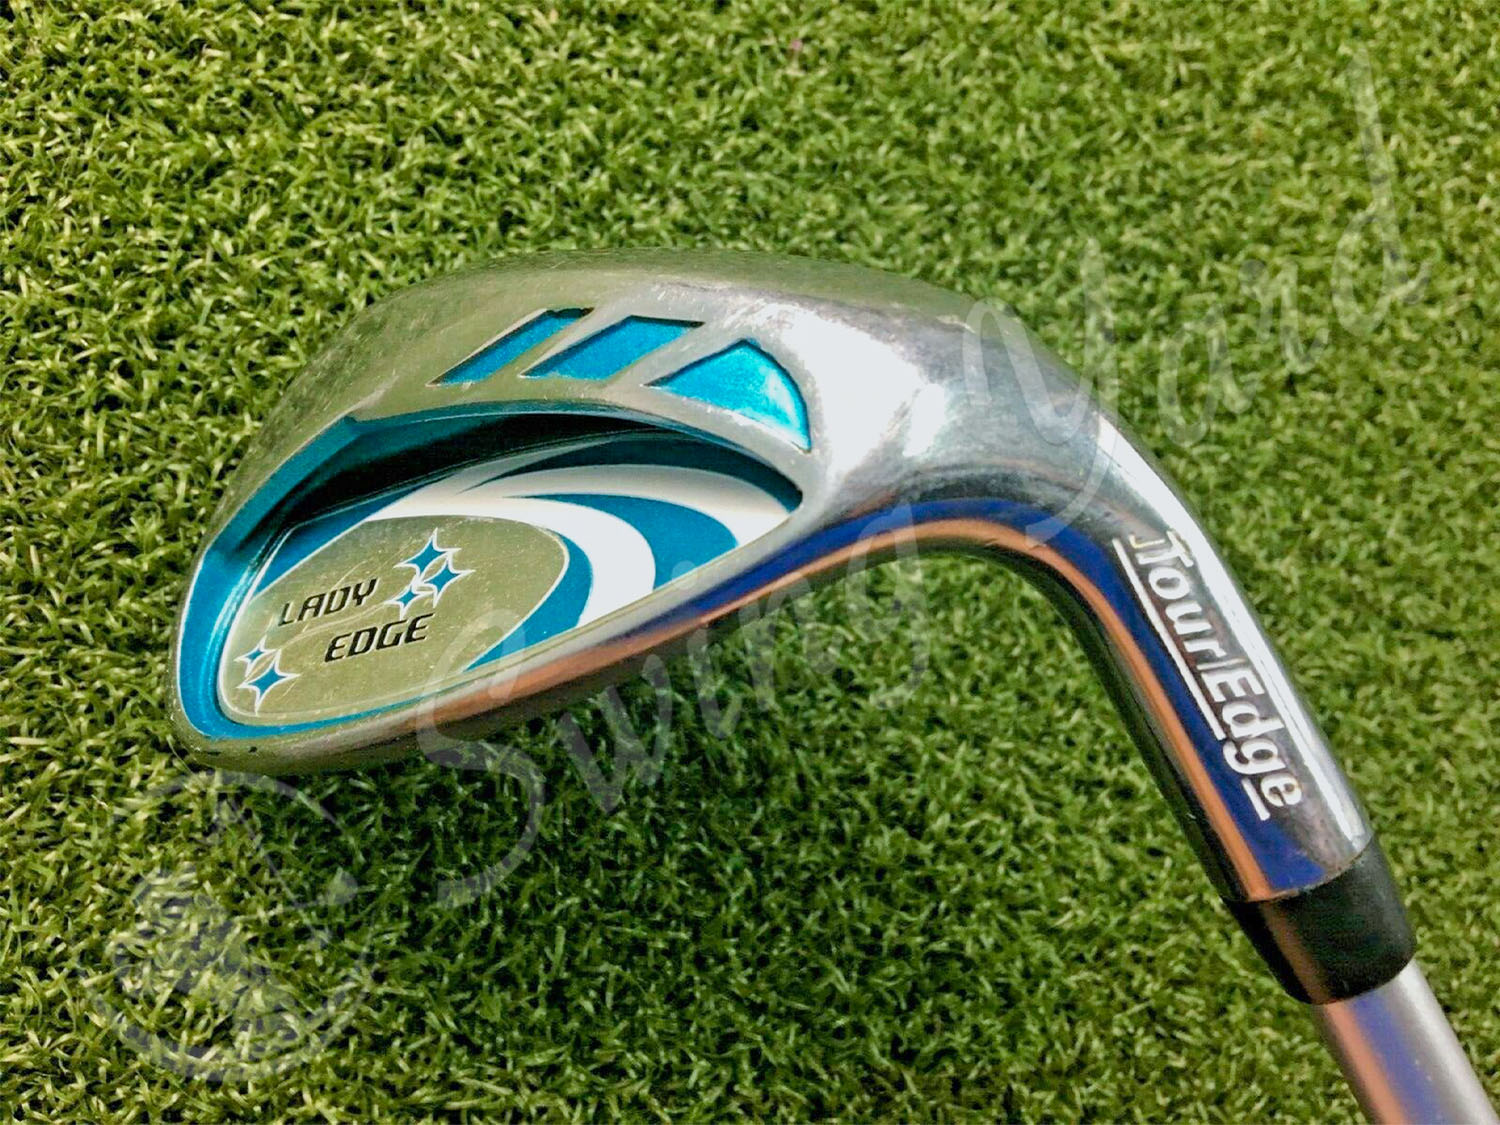 The Tour Edge Lady Edge Iron in the grass for testing at the golf course